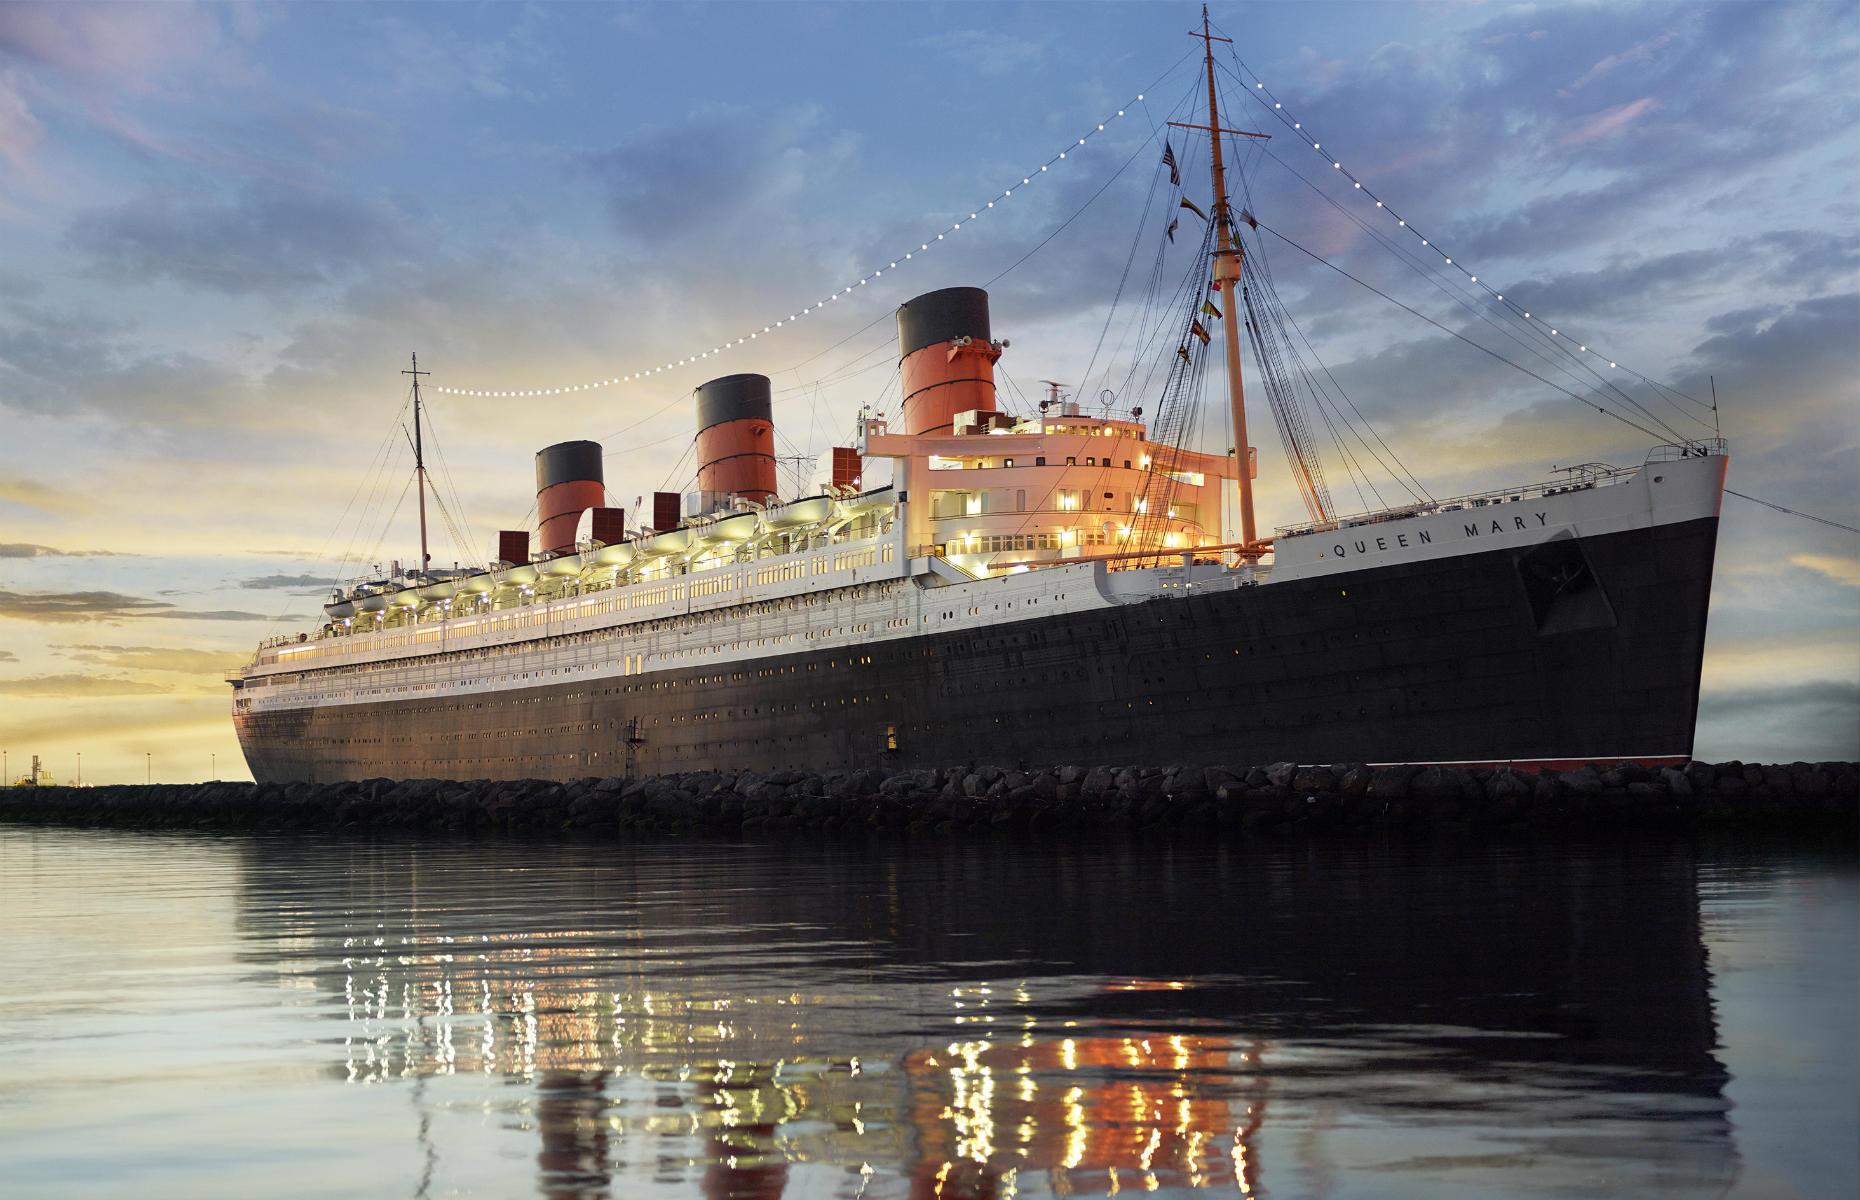 <p>Until the pandemic of 2020, she continued her life of glamor permanently moored in Los Angeles’ Long Beach as <a href="https://www.queenmary.com/">a hotel and attraction</a>. When she's open, you can stay in one of its many gorgeous Art Deco staterooms, visit for the day or even take advantage of the onboard spa, but for now the ship remains closed until further notice. </p>